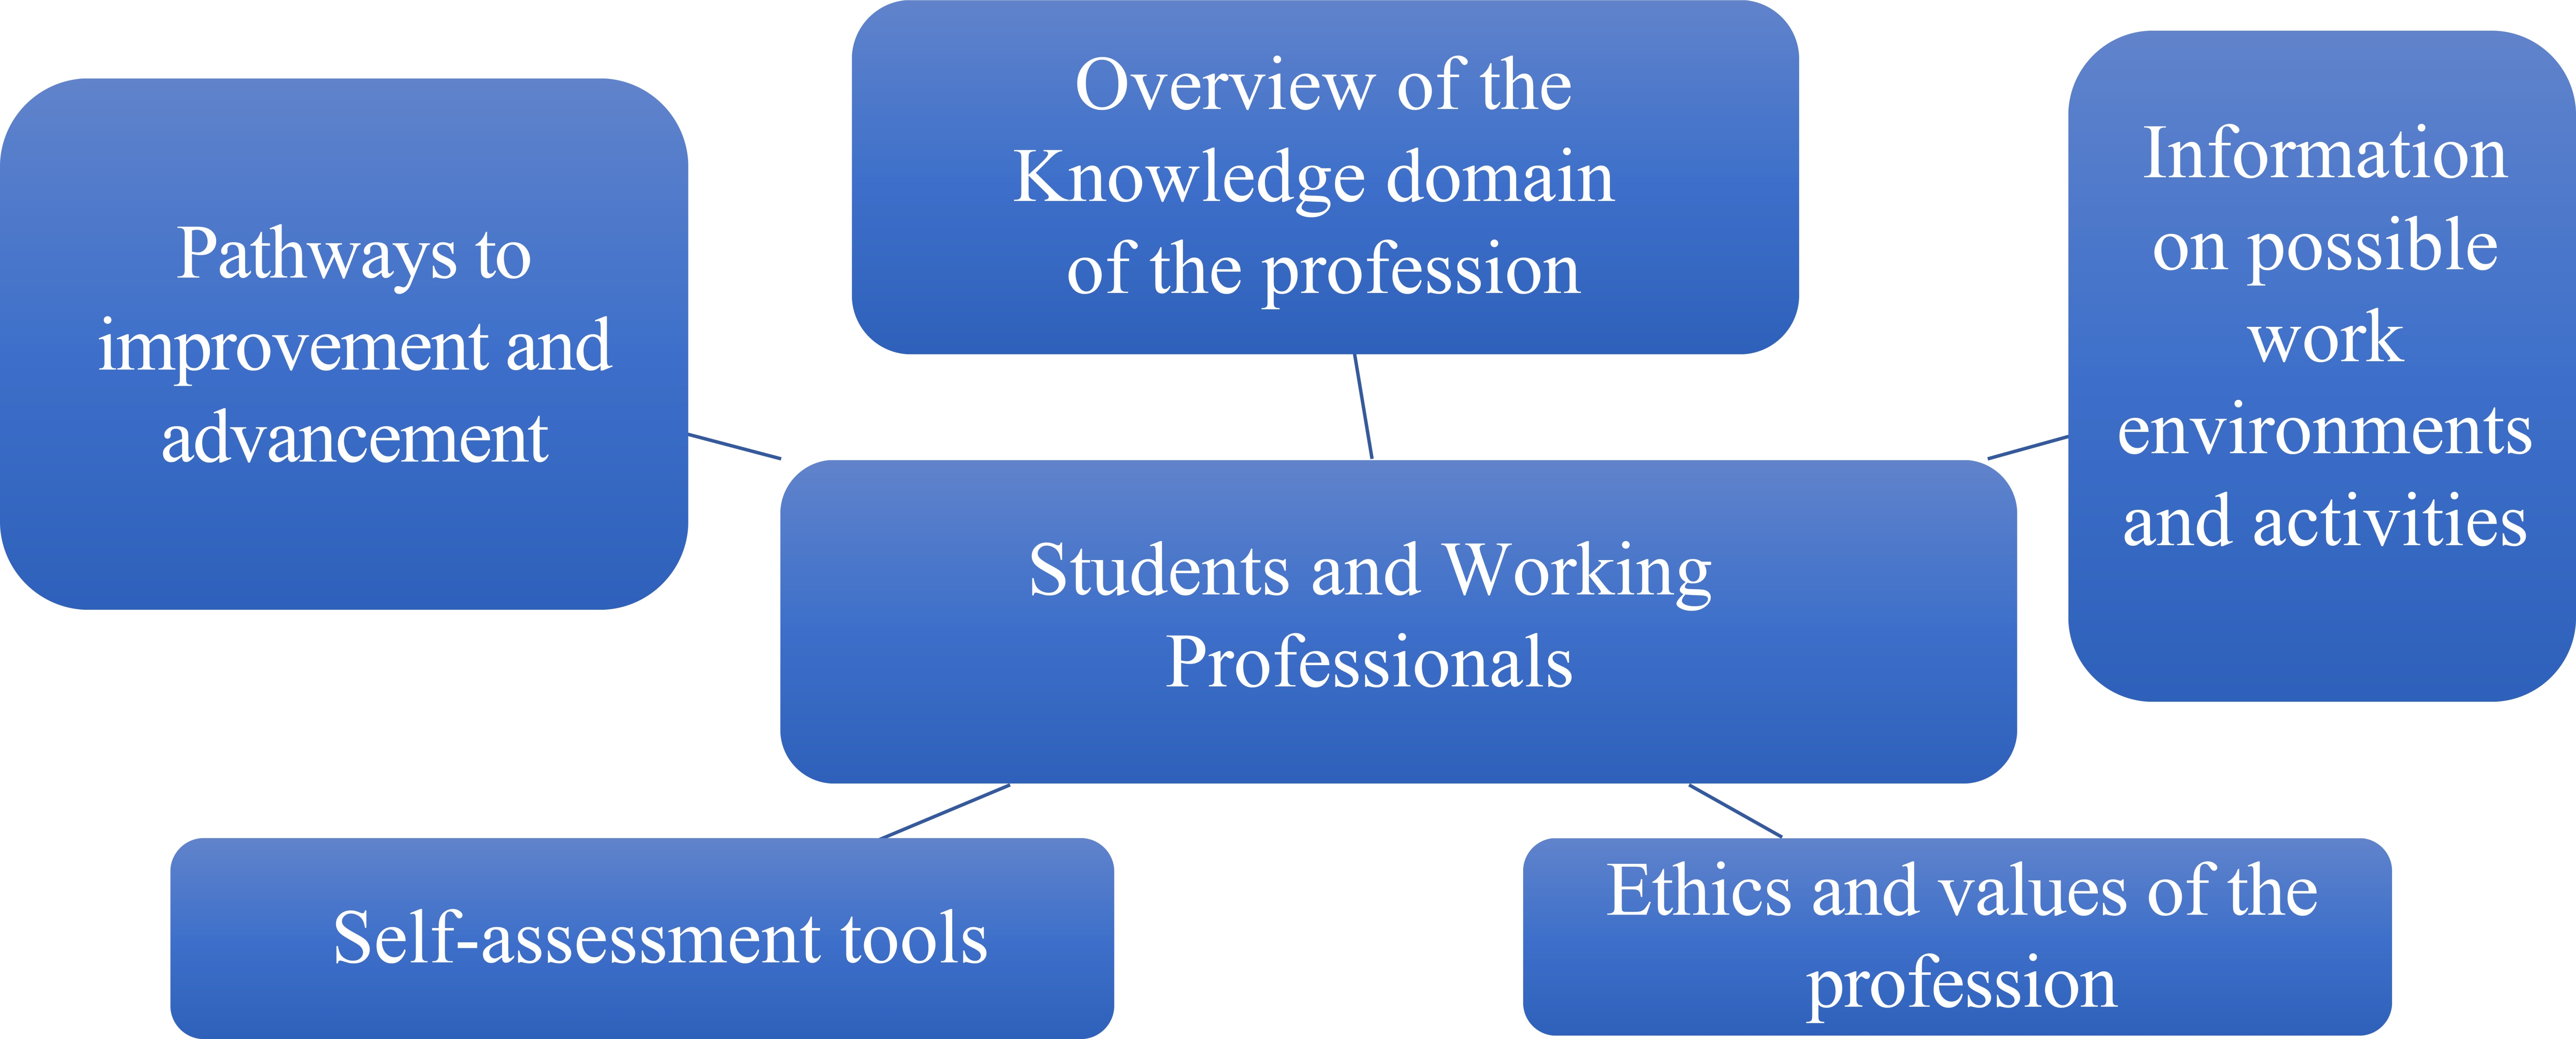 Competency needs of audiovisual archiving students and working professionals.